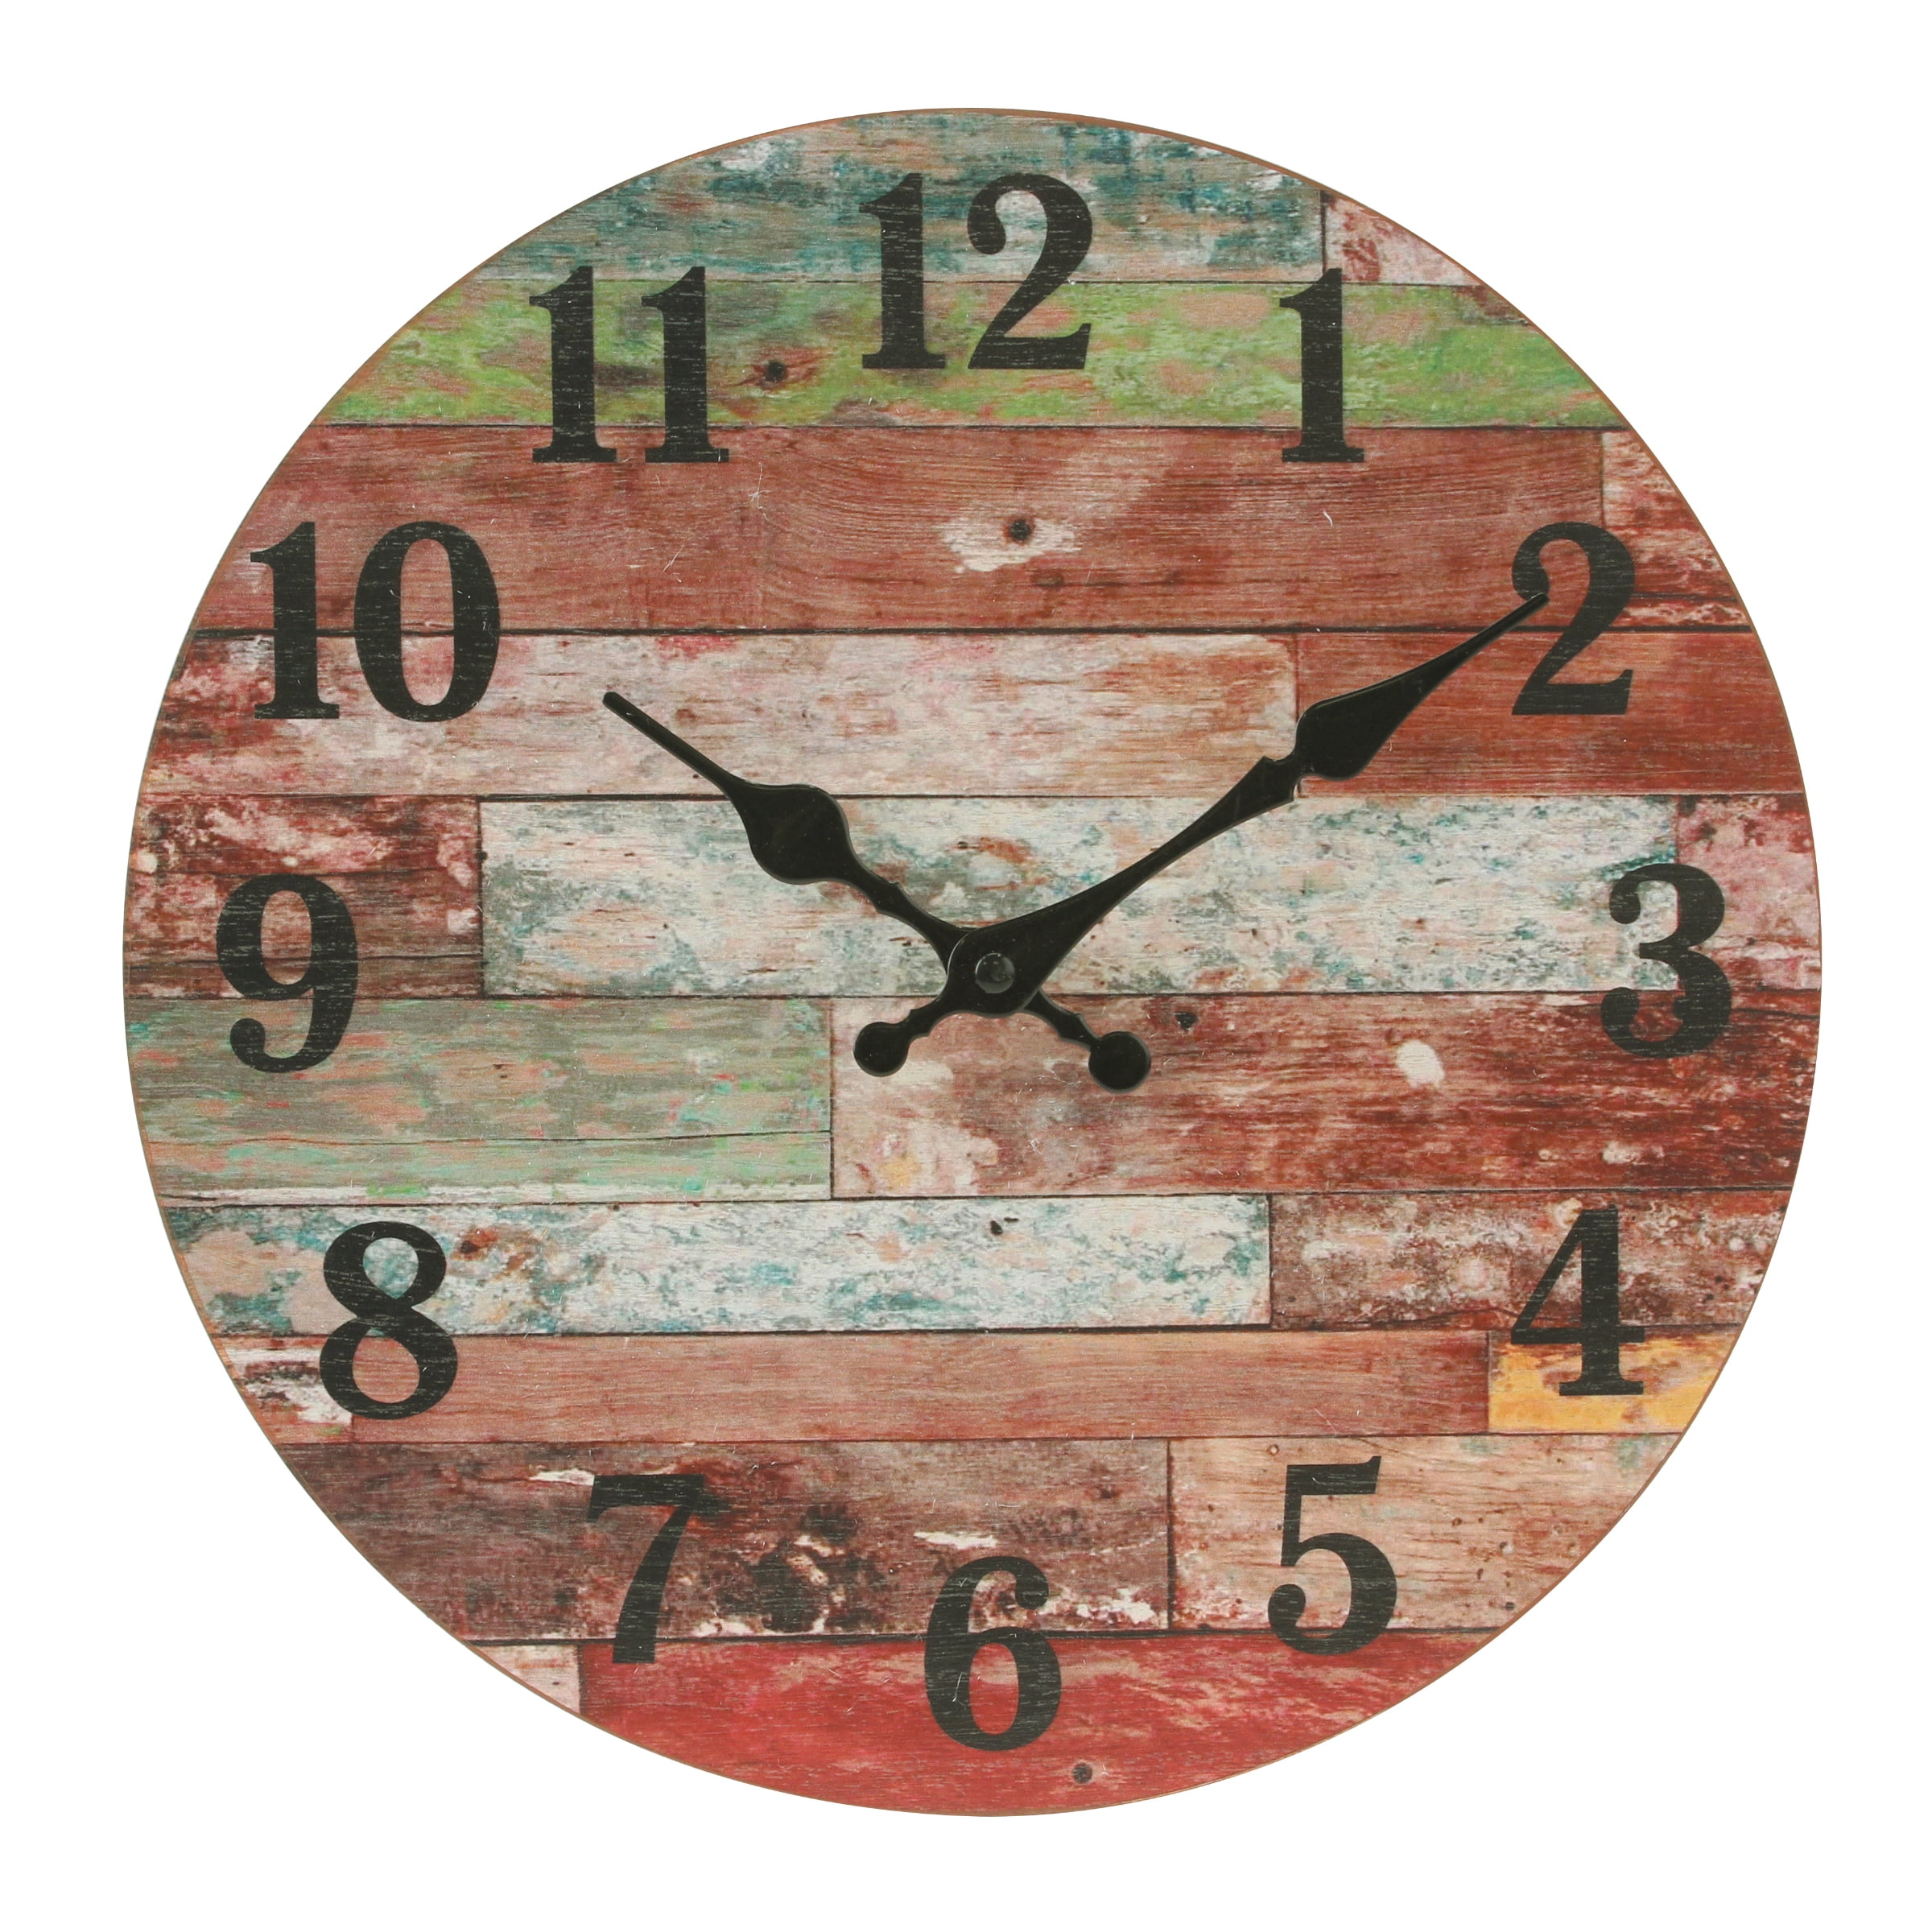 Coke Cute Tree Wall Clock Silent Non Ticking Round Wall Clock Battery Operated 12 Inch Farmhouse Clocks for Home Living Room Bedroom Decor